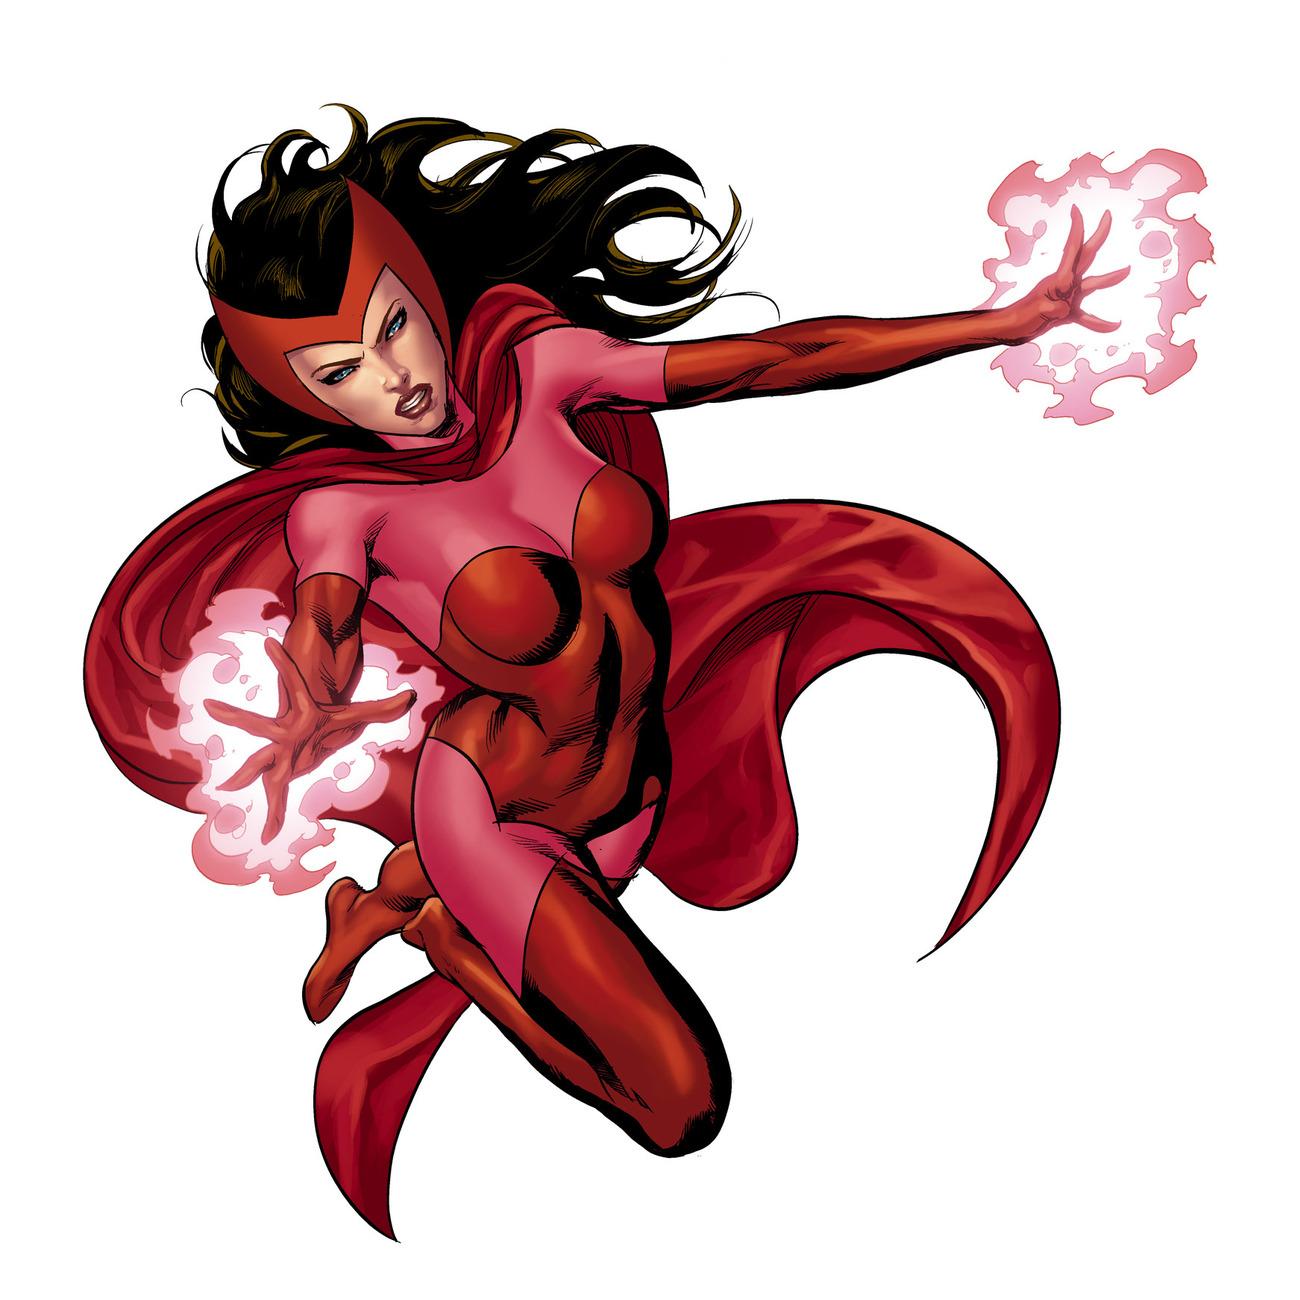 The_Scarlet_Witch.jpg